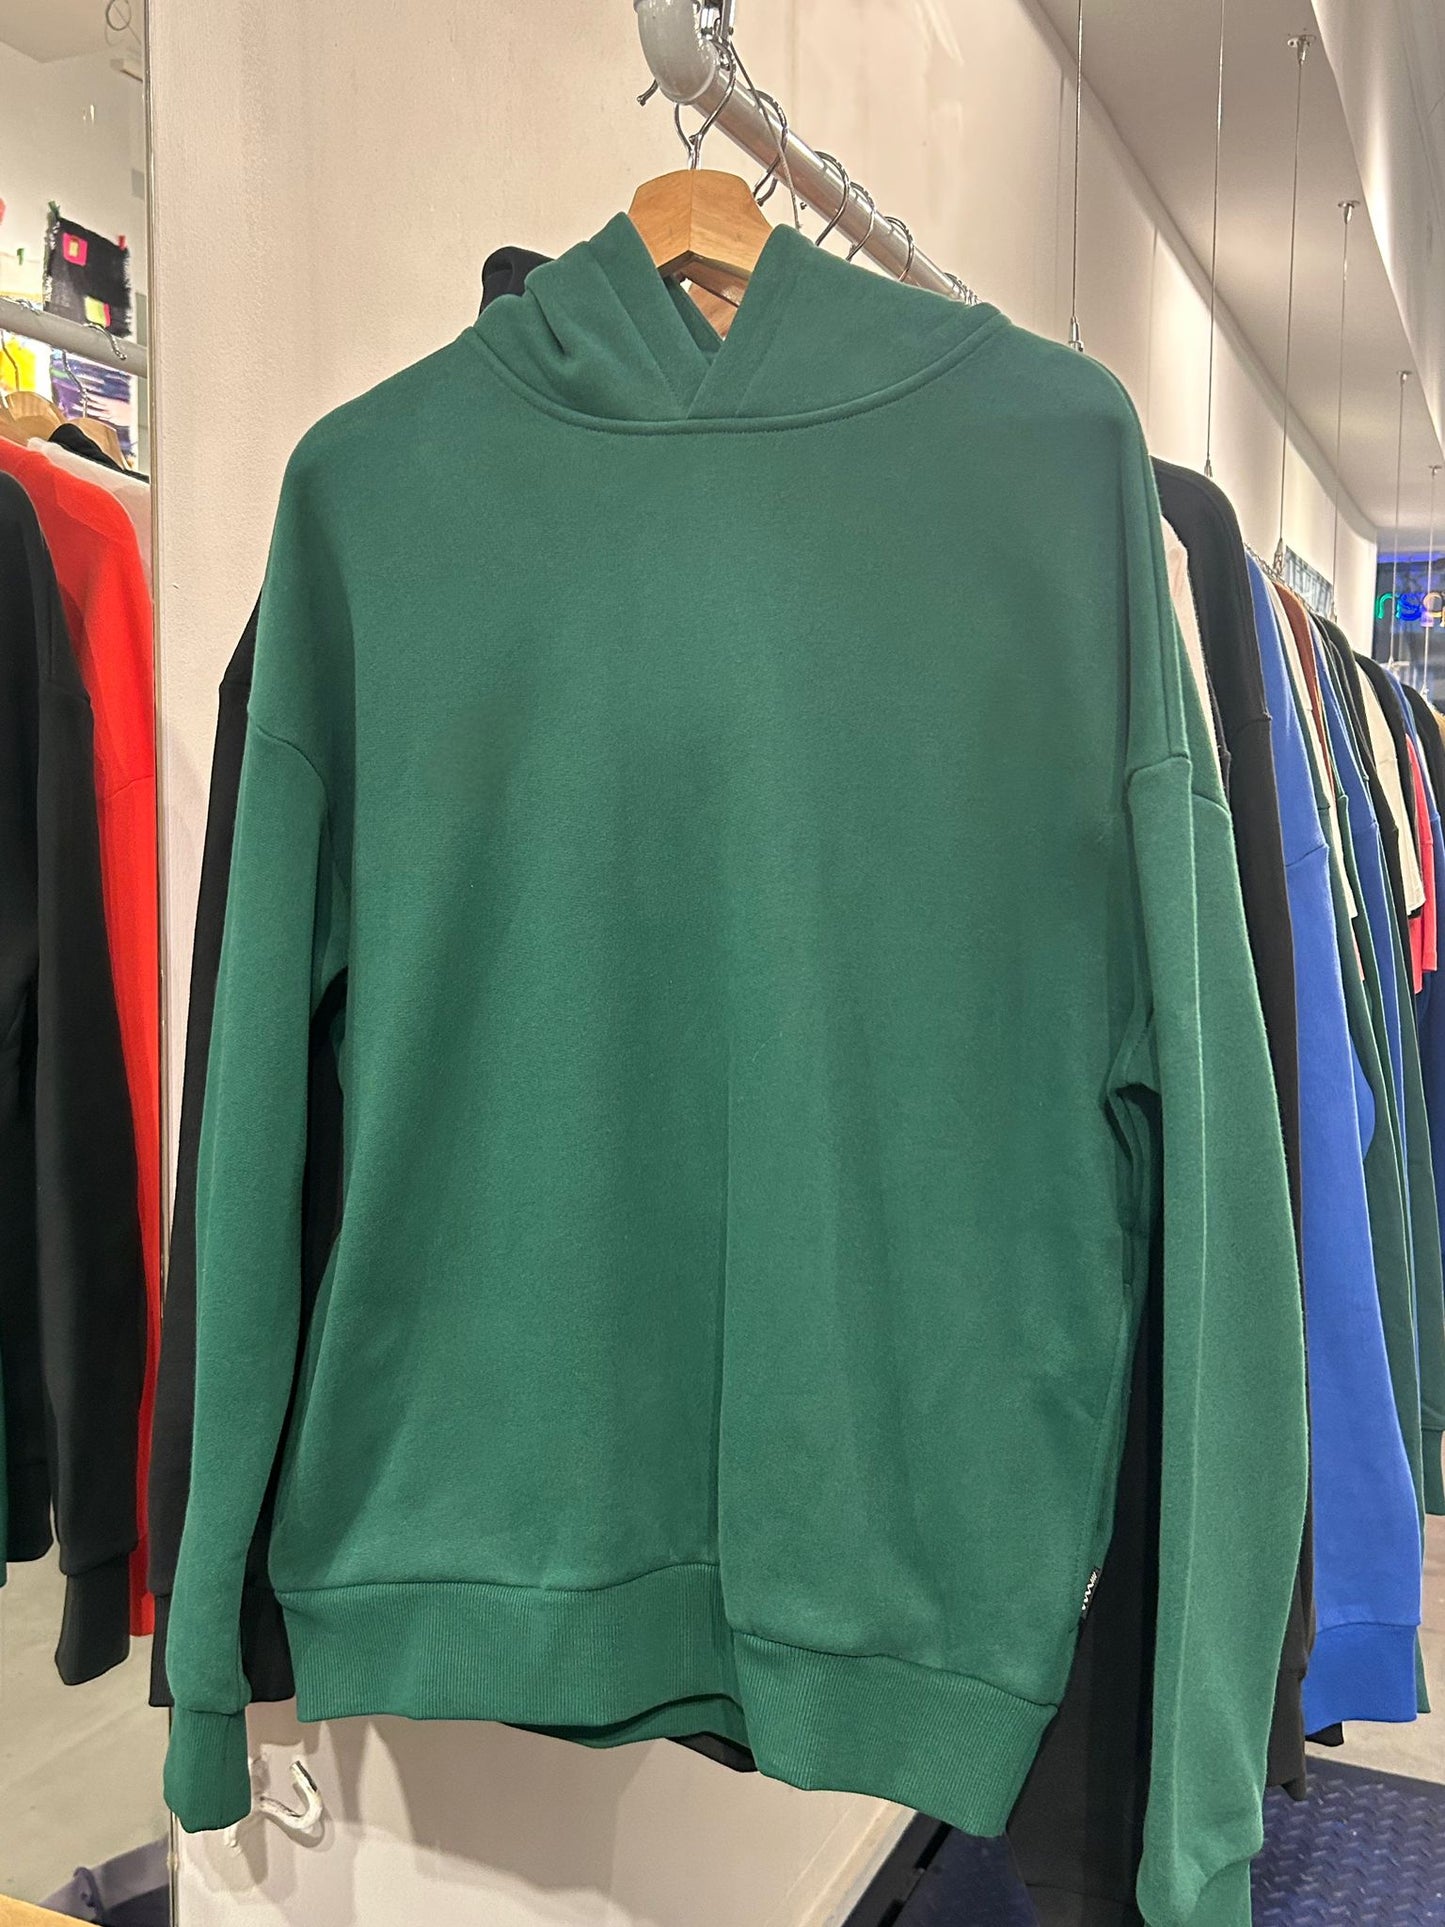 Forest Green Hoodie